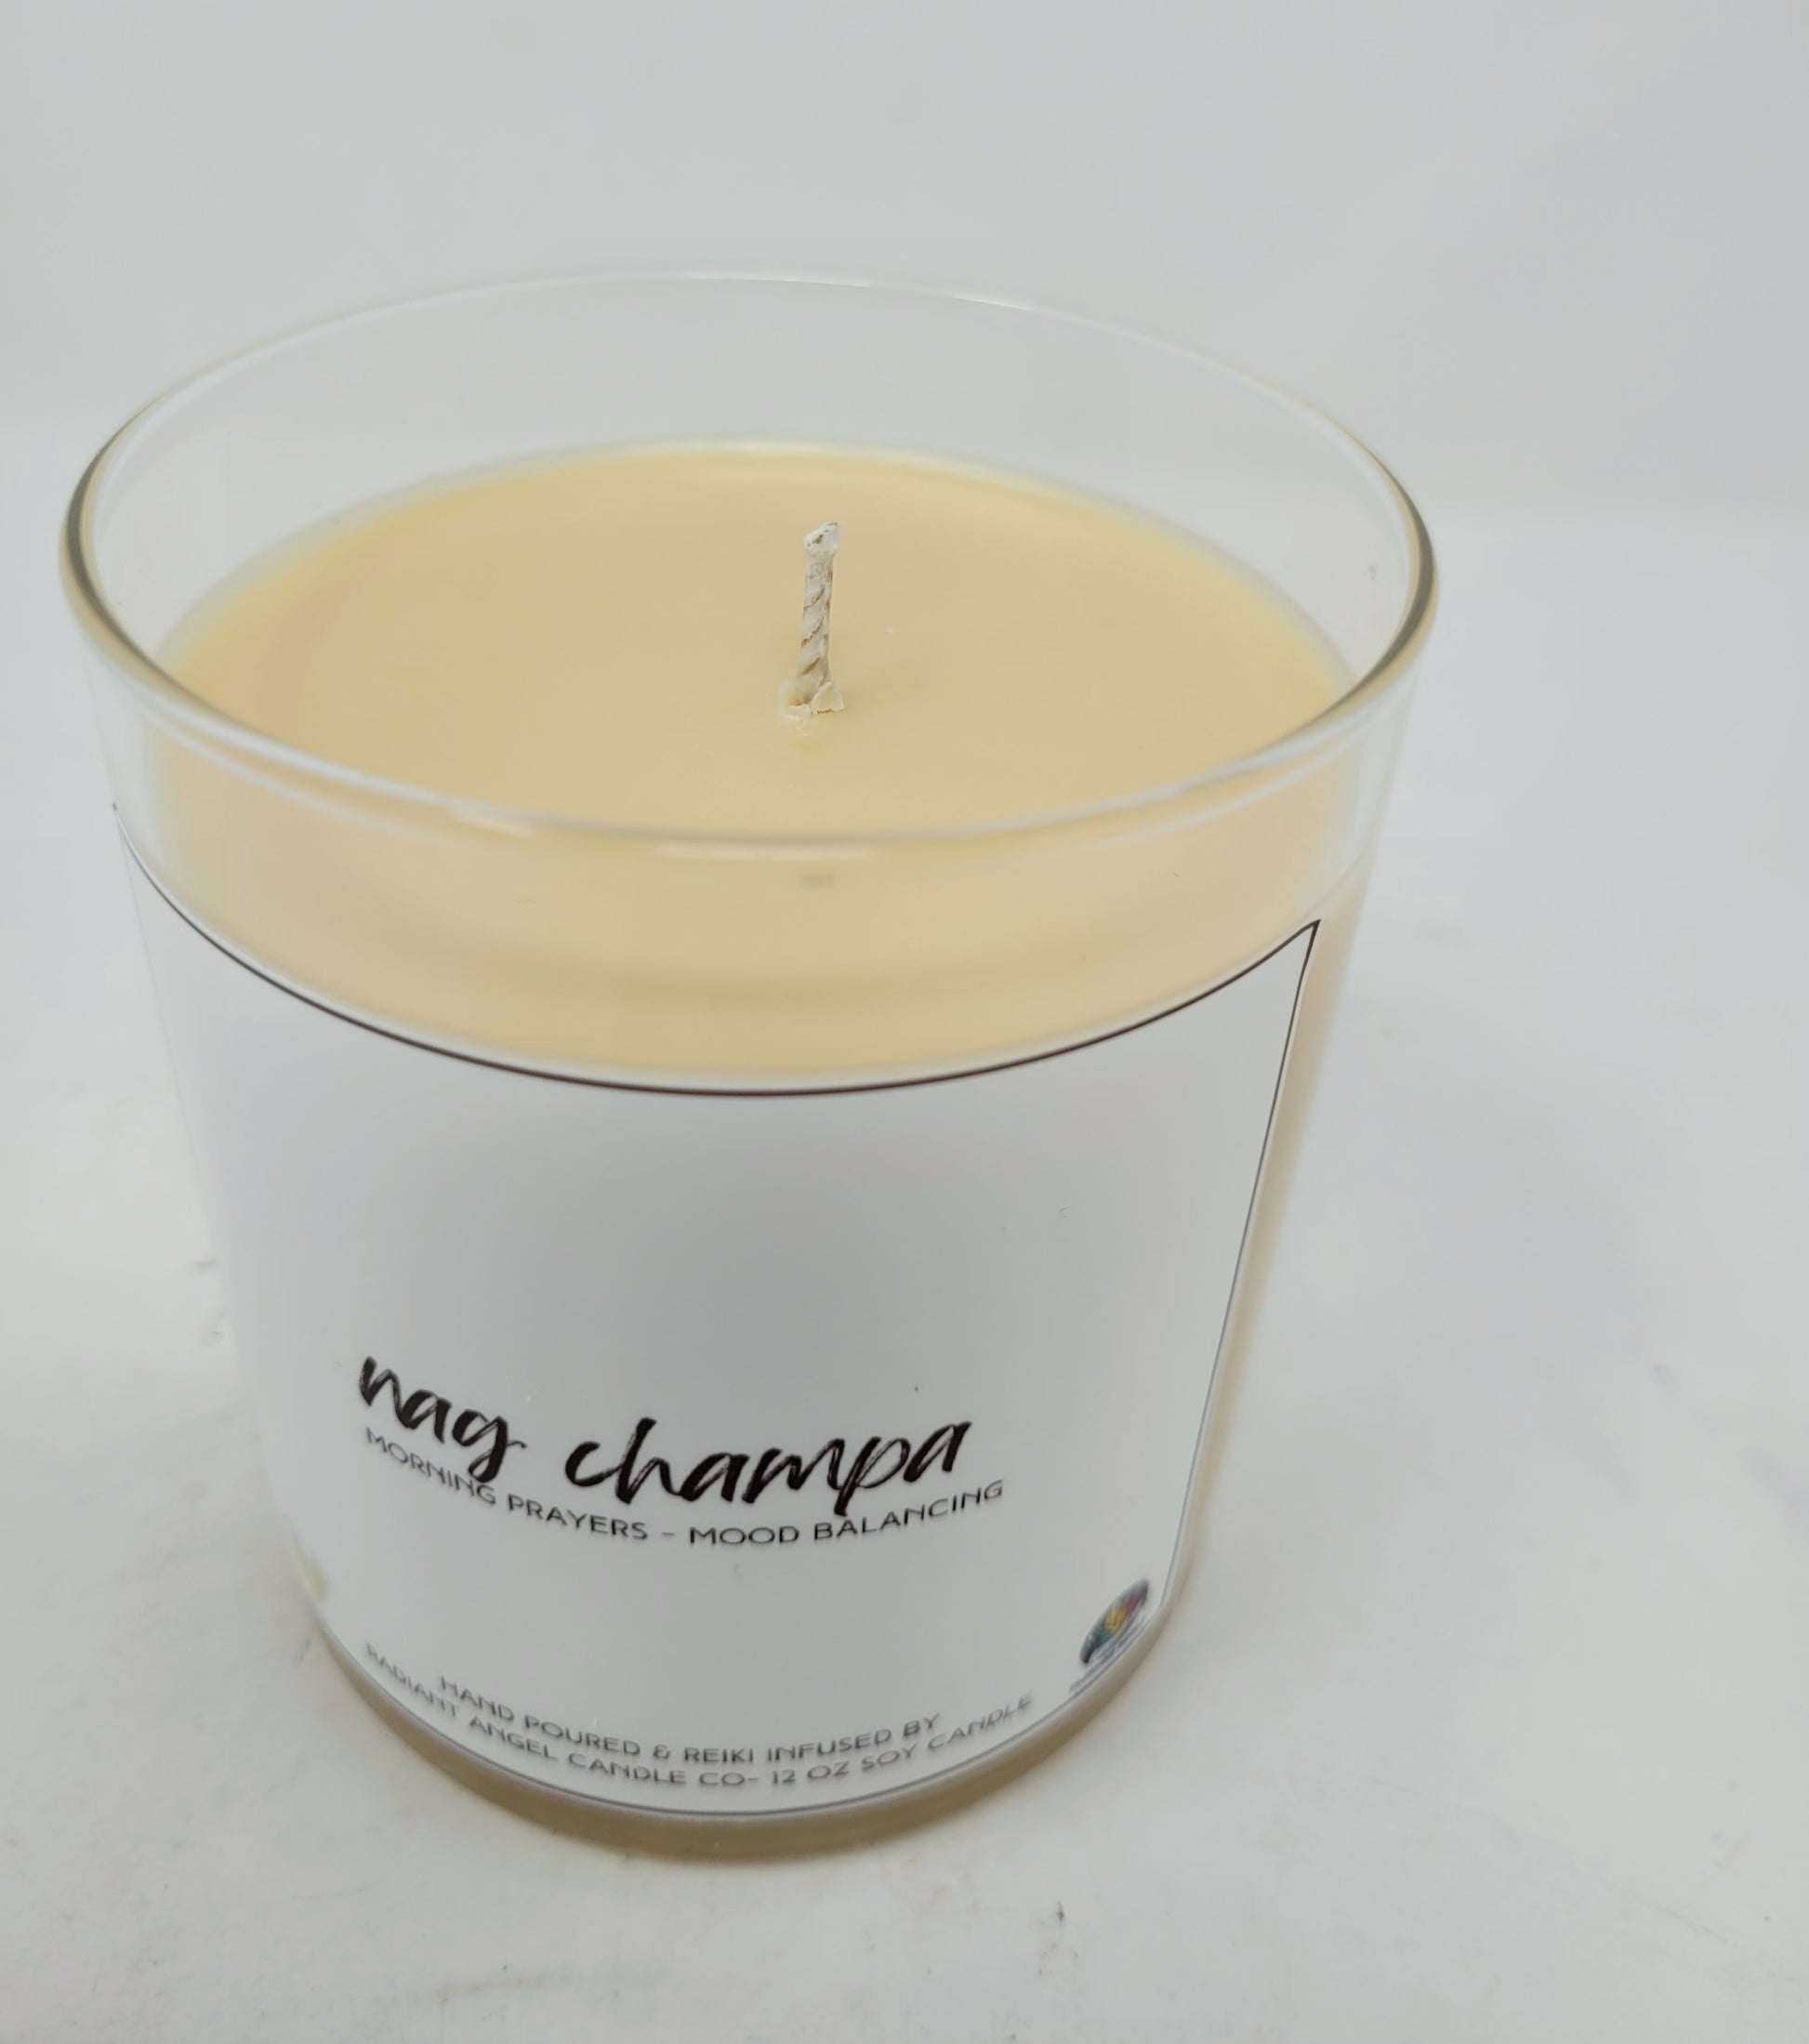 NAG CHAMPA 4 oz Scented Soy Candle